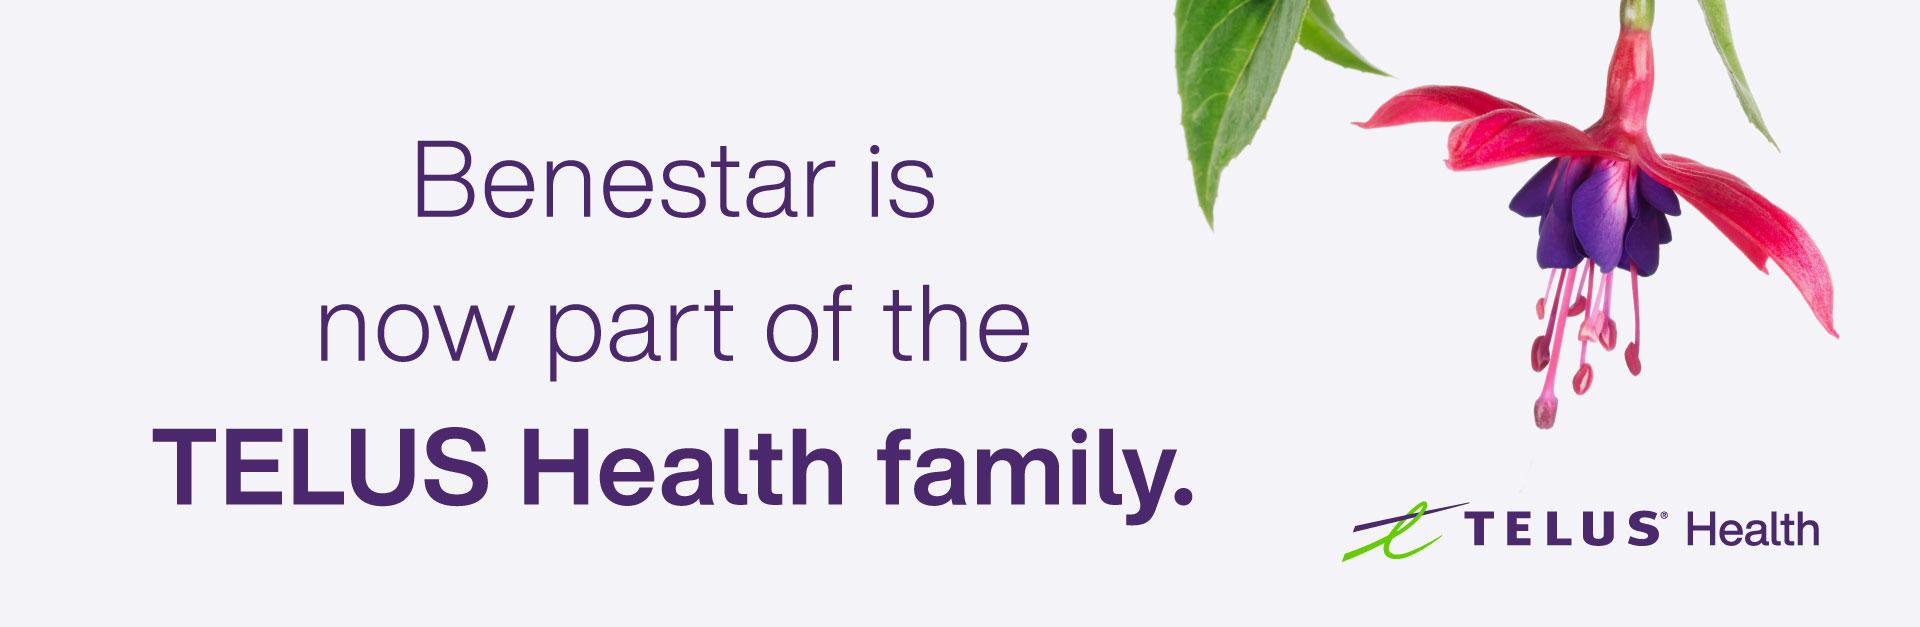 Benestar is now part of the TELUS Health family